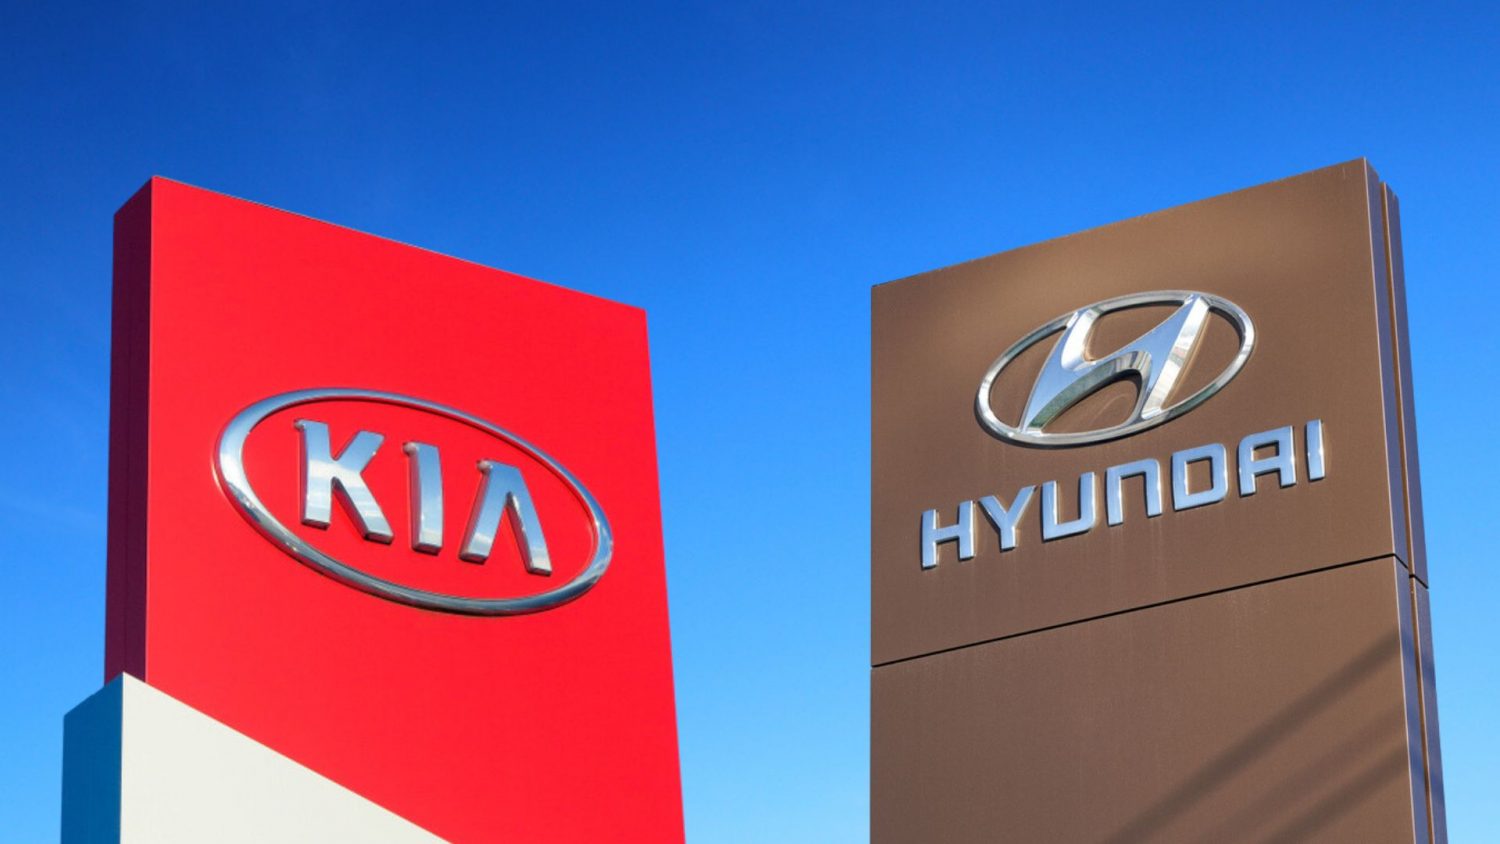 Kia and Hyundai both saw impressive sales in September, but trended in opposite directions over the third quarter.